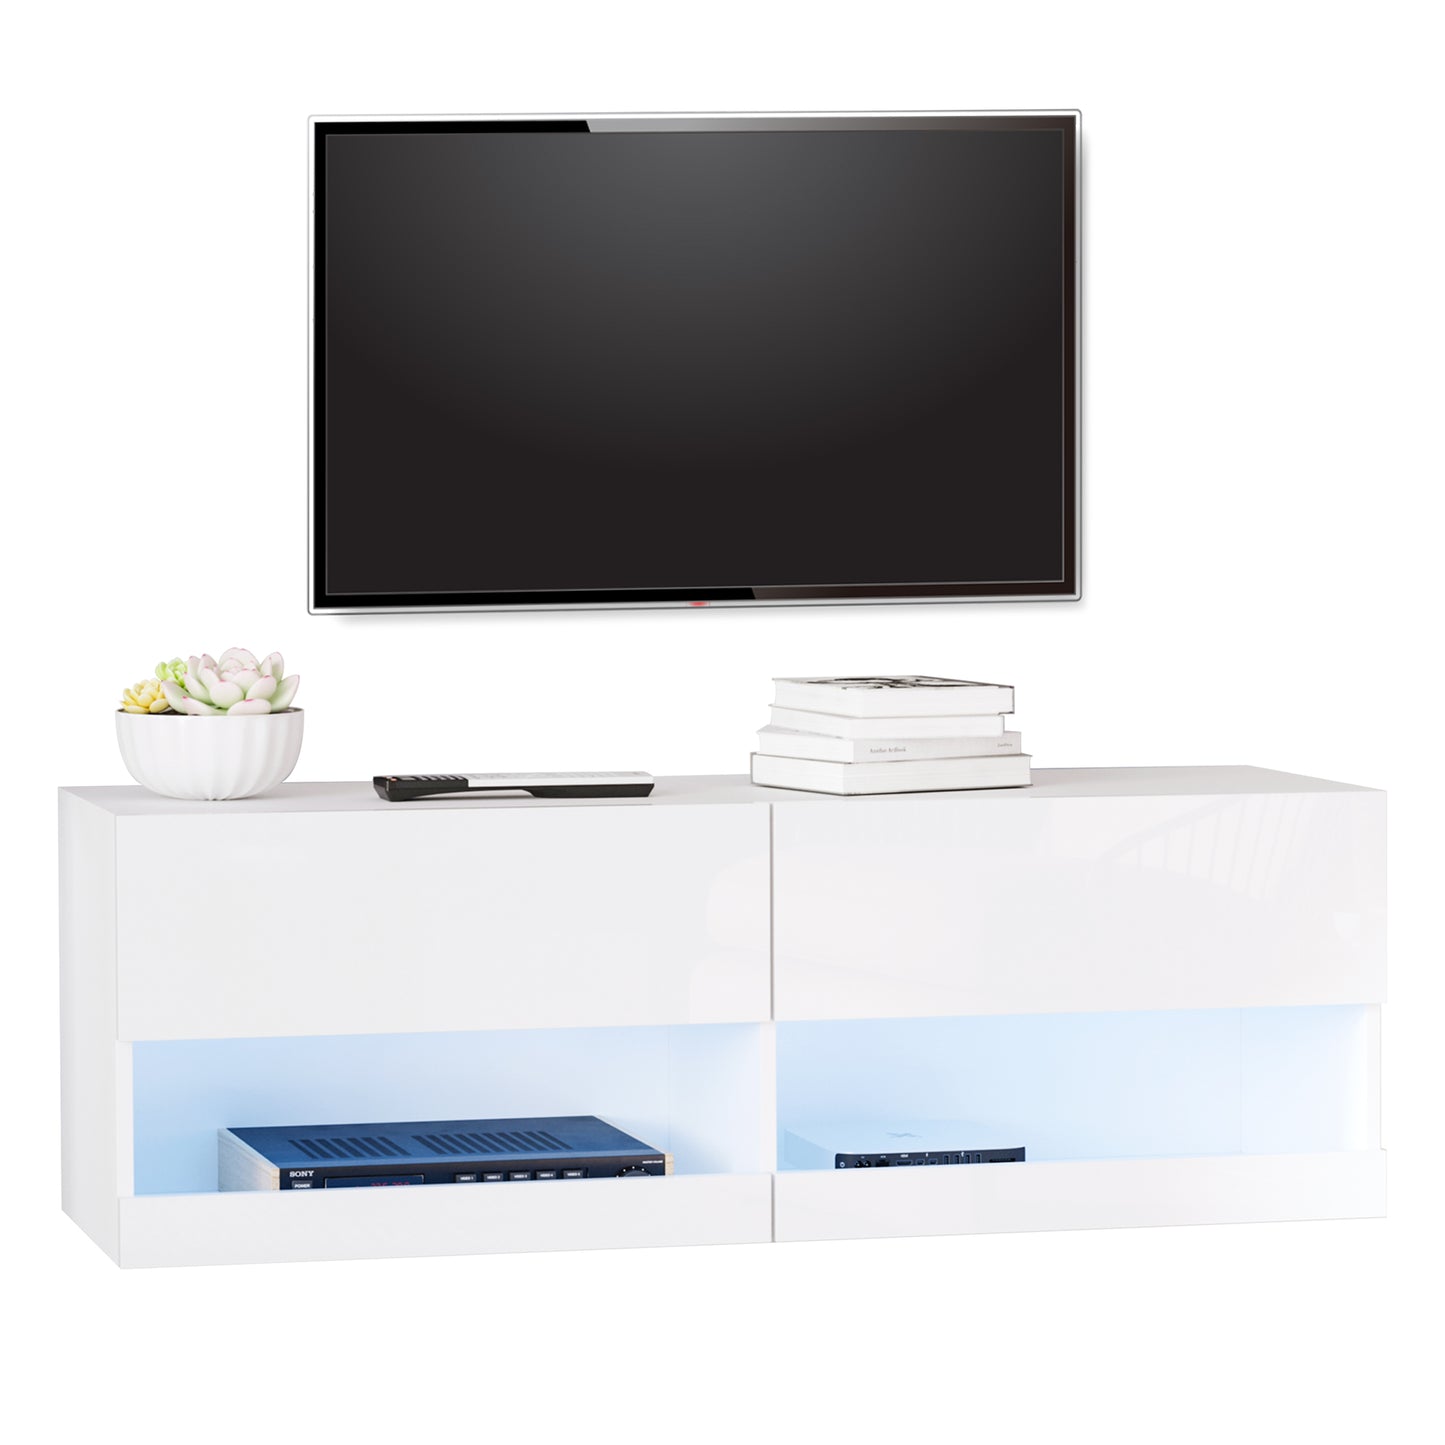 HOMCOM Wall Mount TV Stand Entertainment Center W/ LED Lights, Storage & Cable Holes